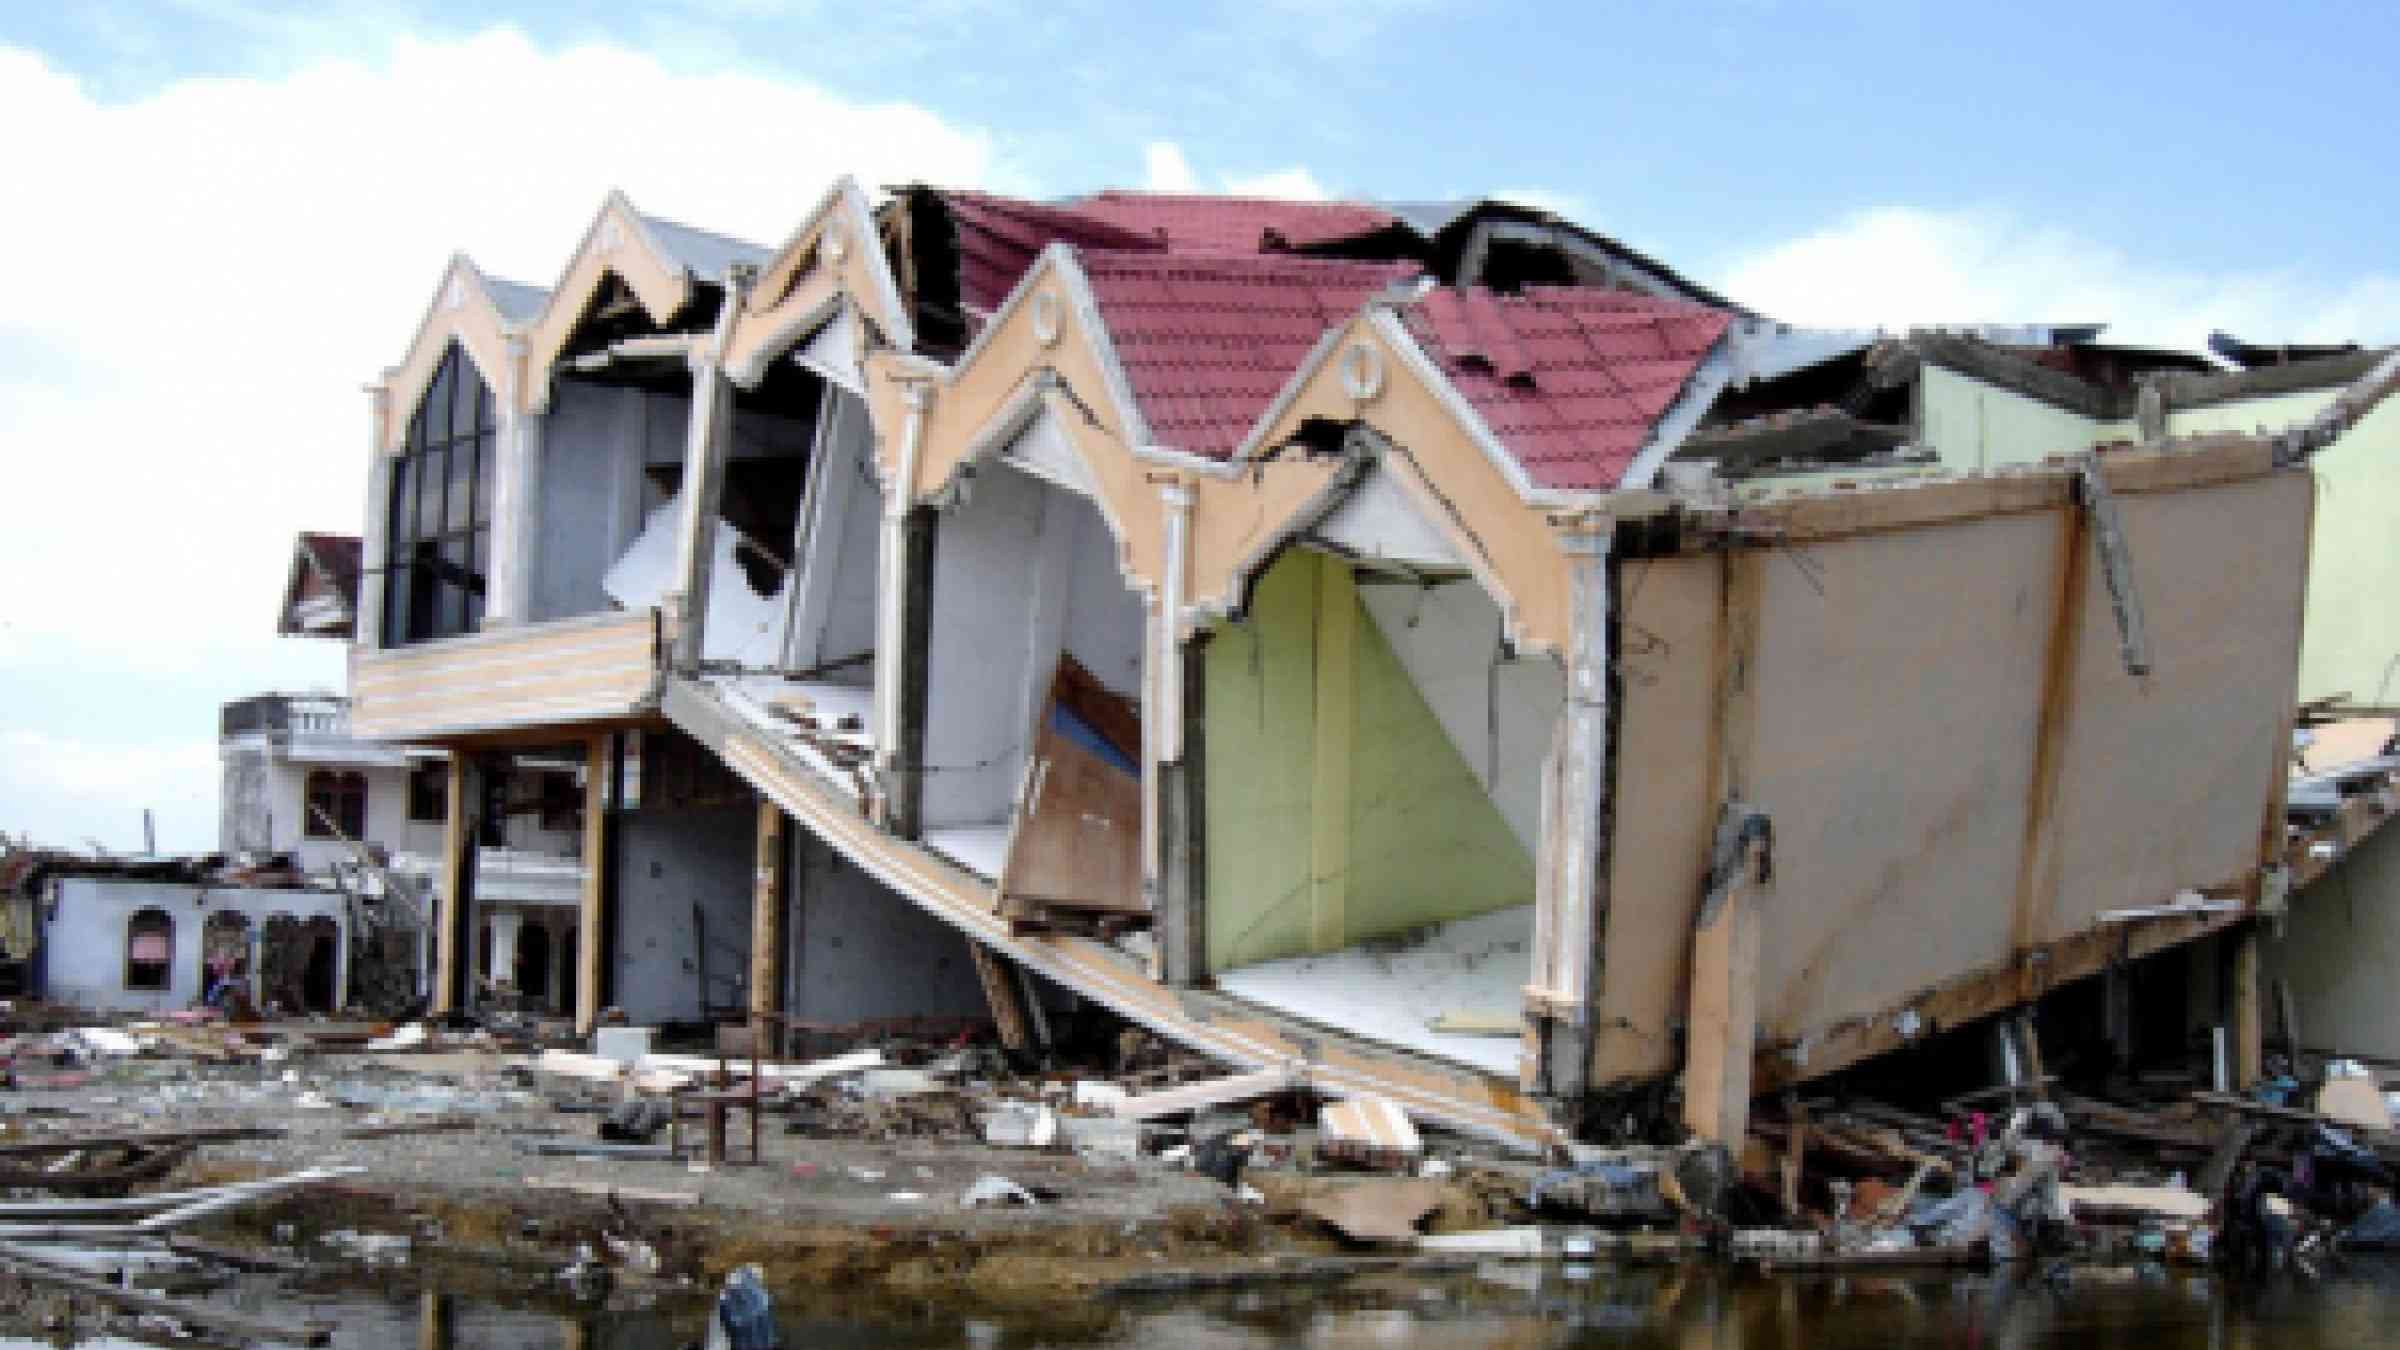 Homes in exposed locations are often not resilient enough to withstand extreme weather events